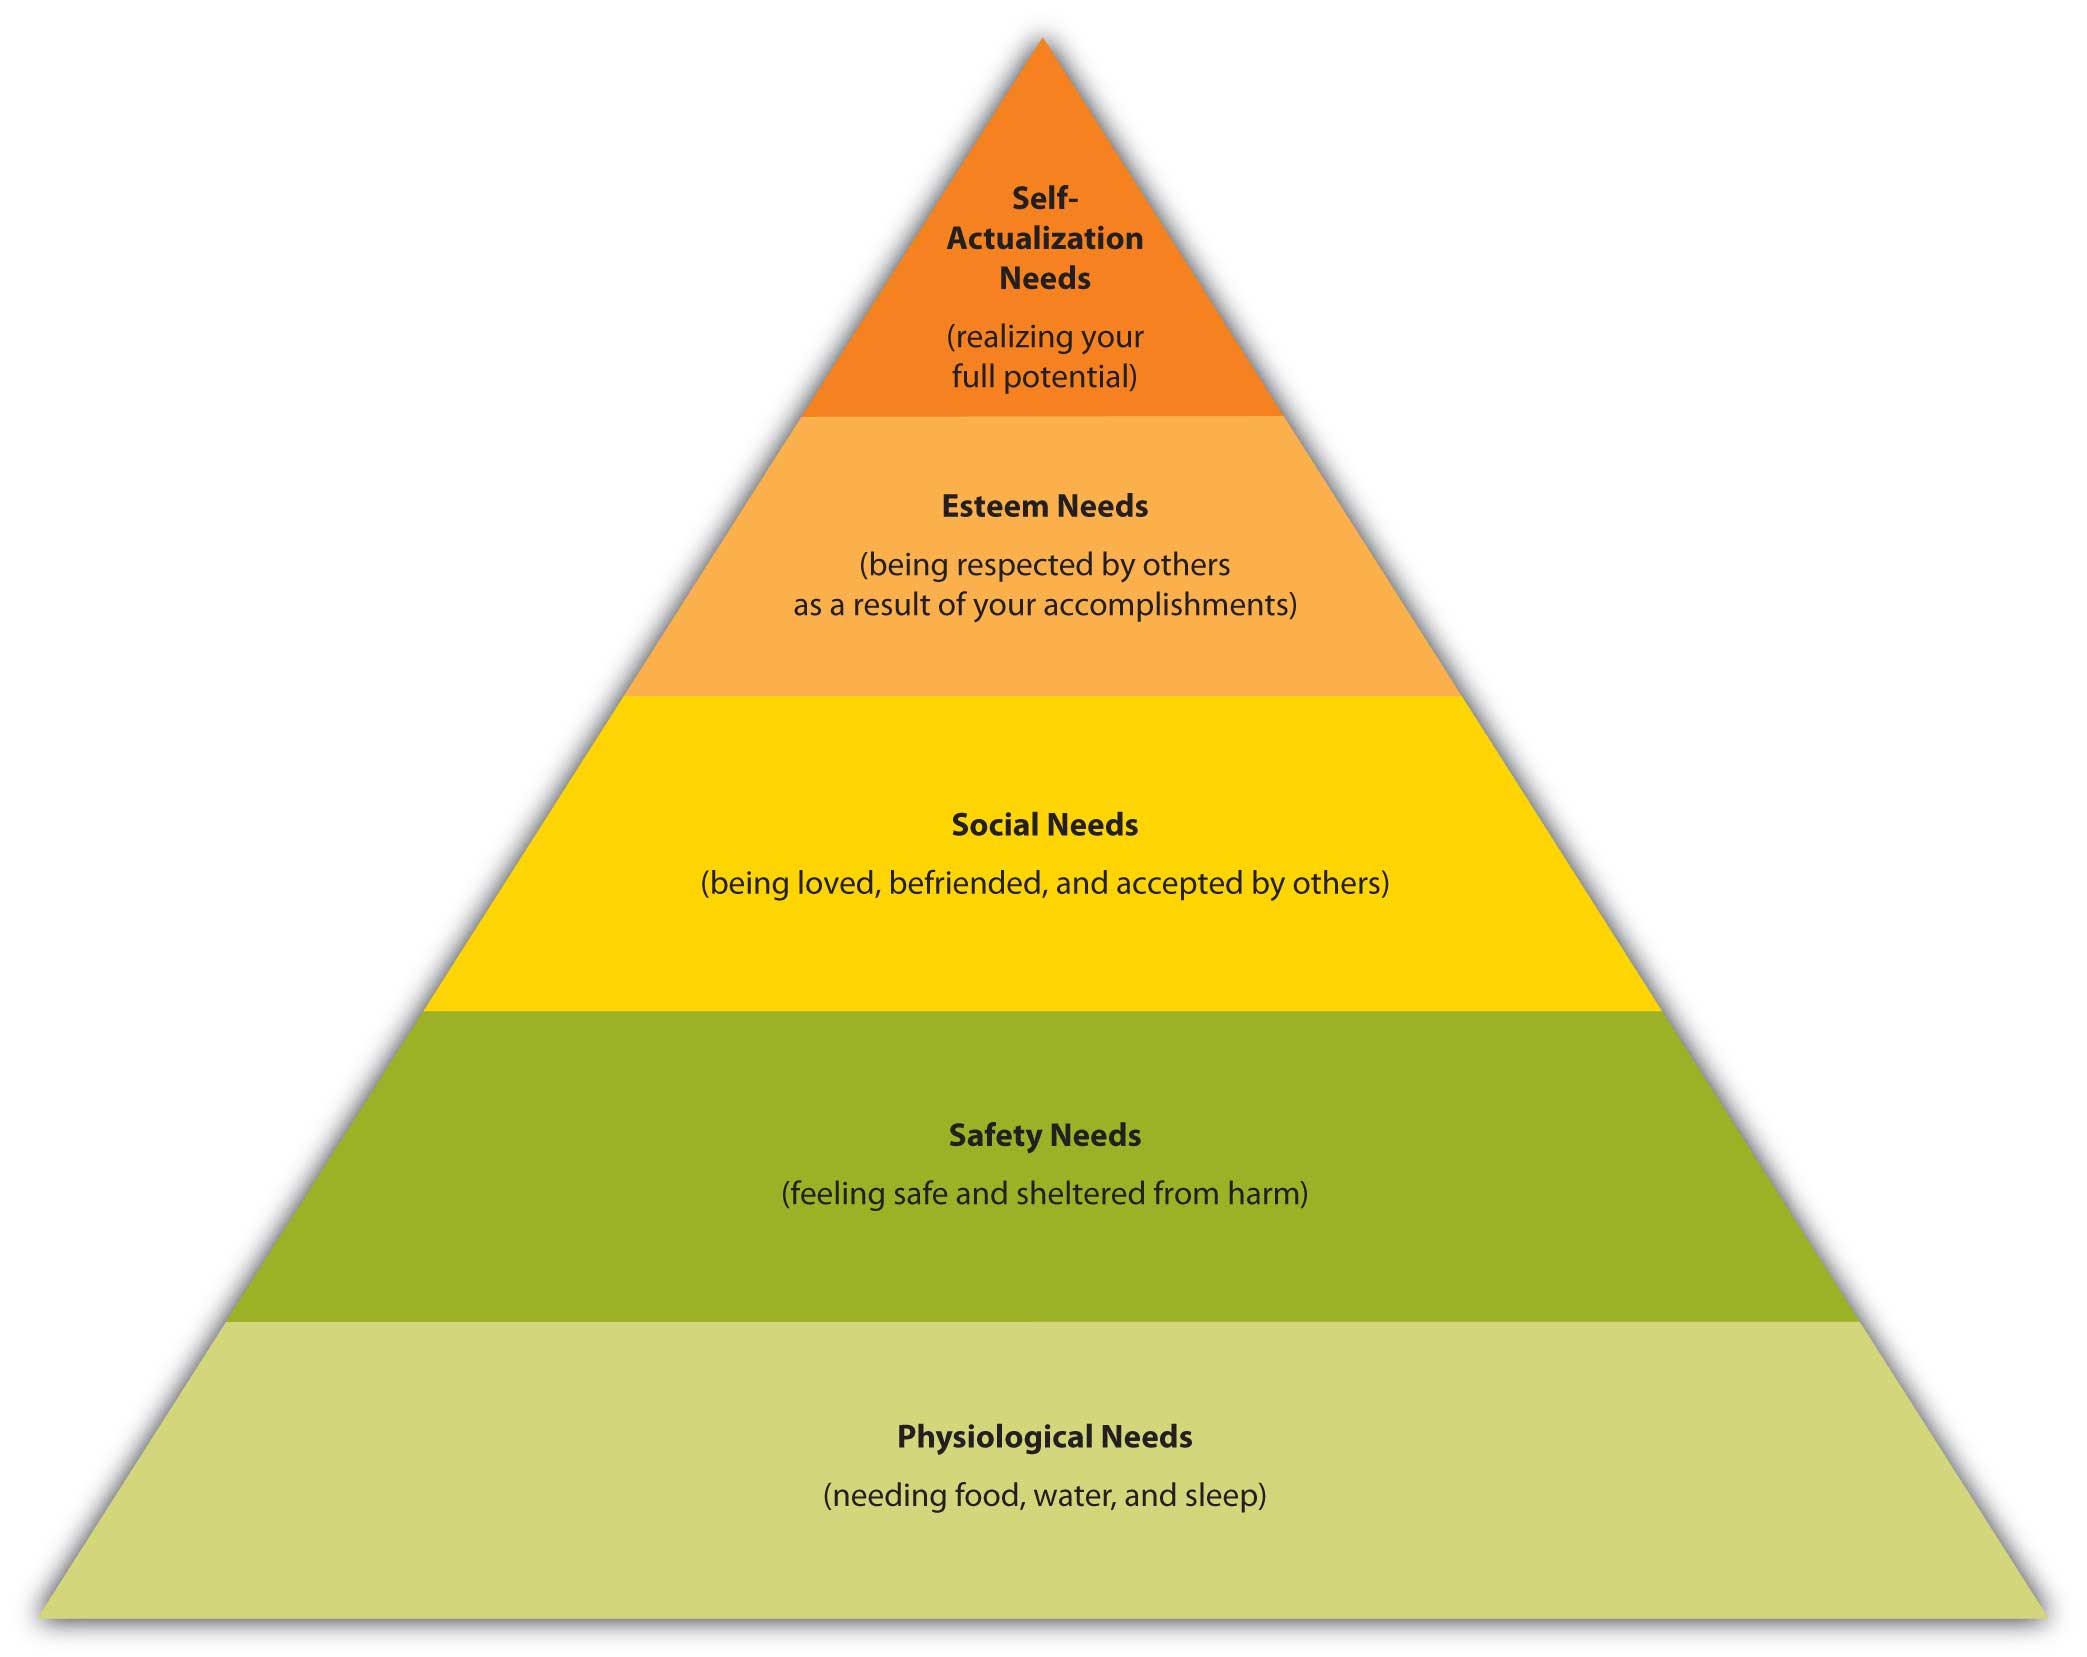 Video games also fill all the higher requirements of Maslow’s 